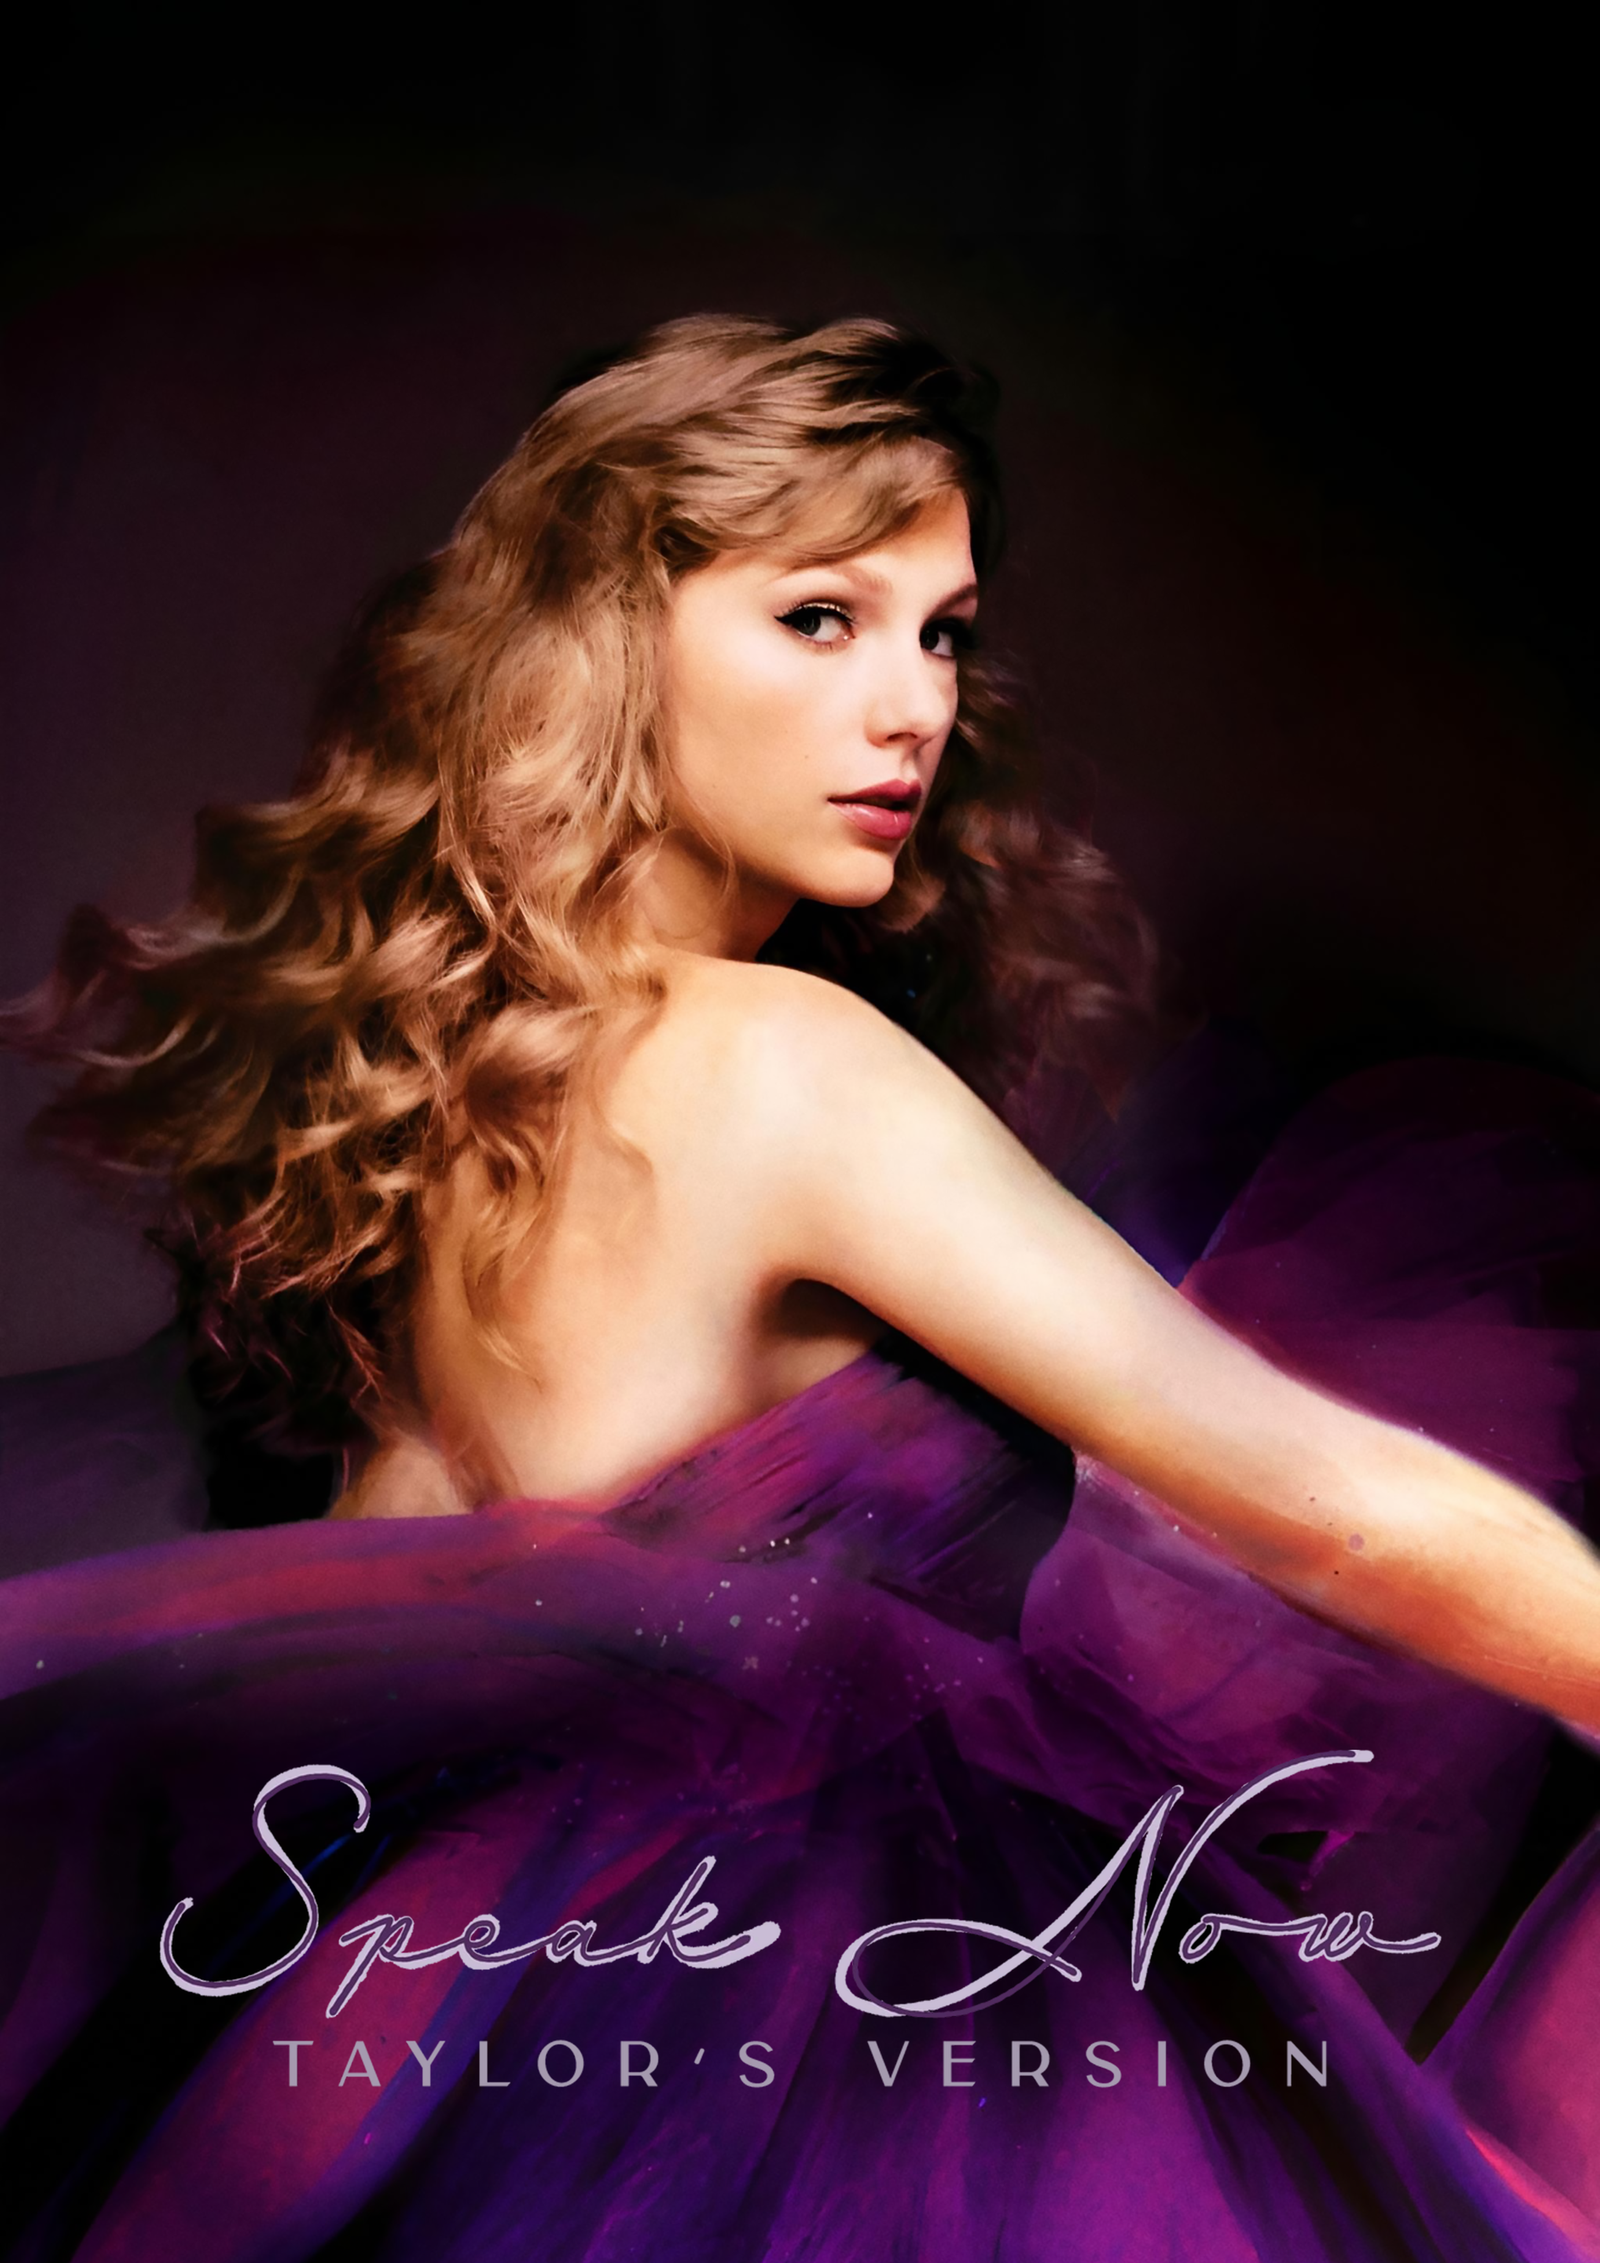 Poster Taylor Swift Speak Now Taylor's Version – Templeton Store